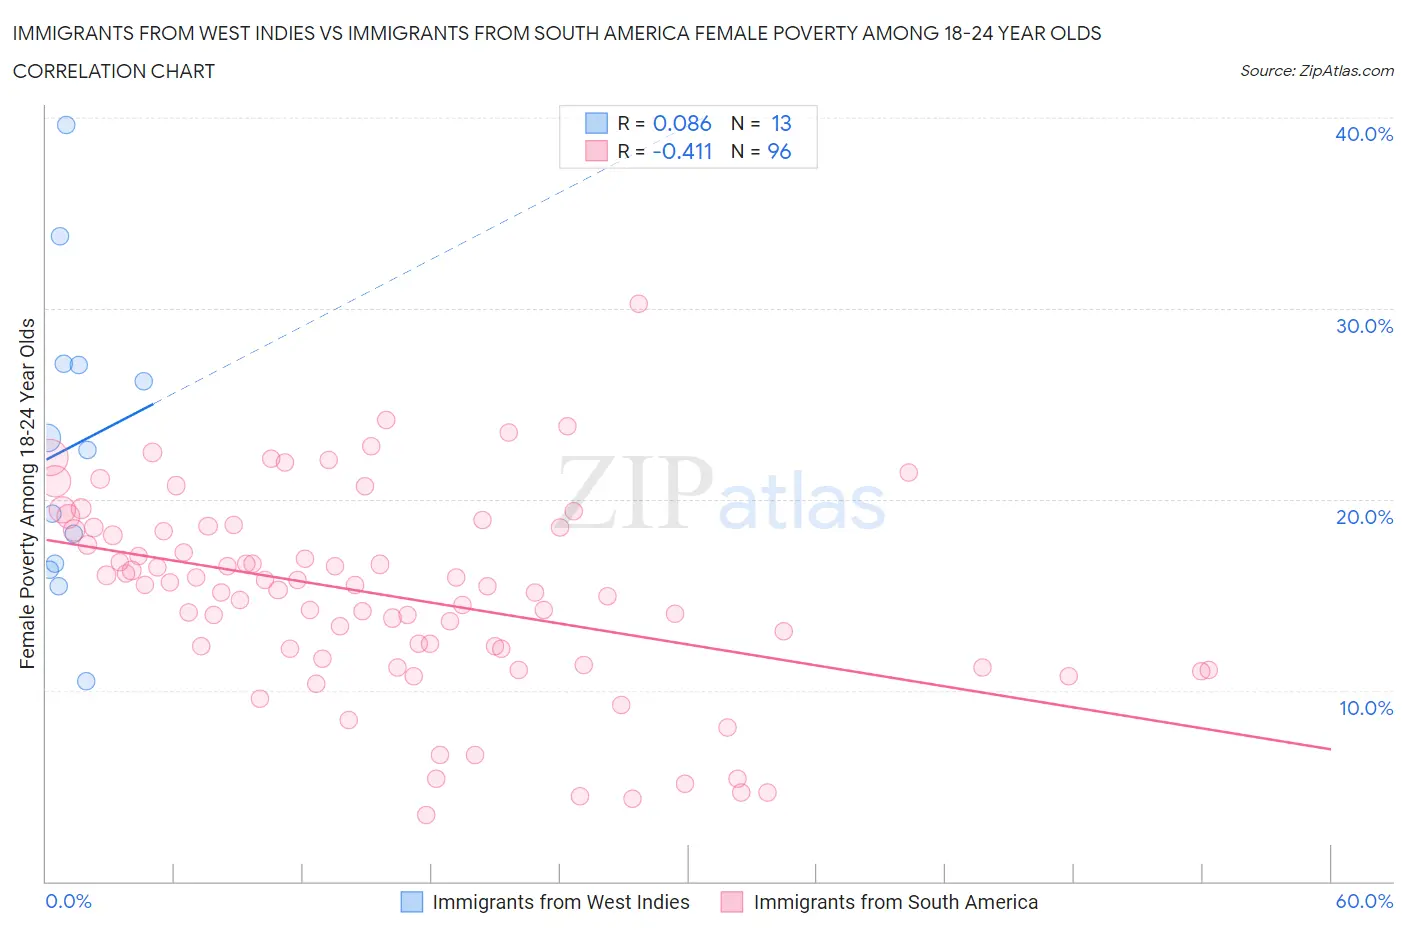 Immigrants from West Indies vs Immigrants from South America Female Poverty Among 18-24 Year Olds